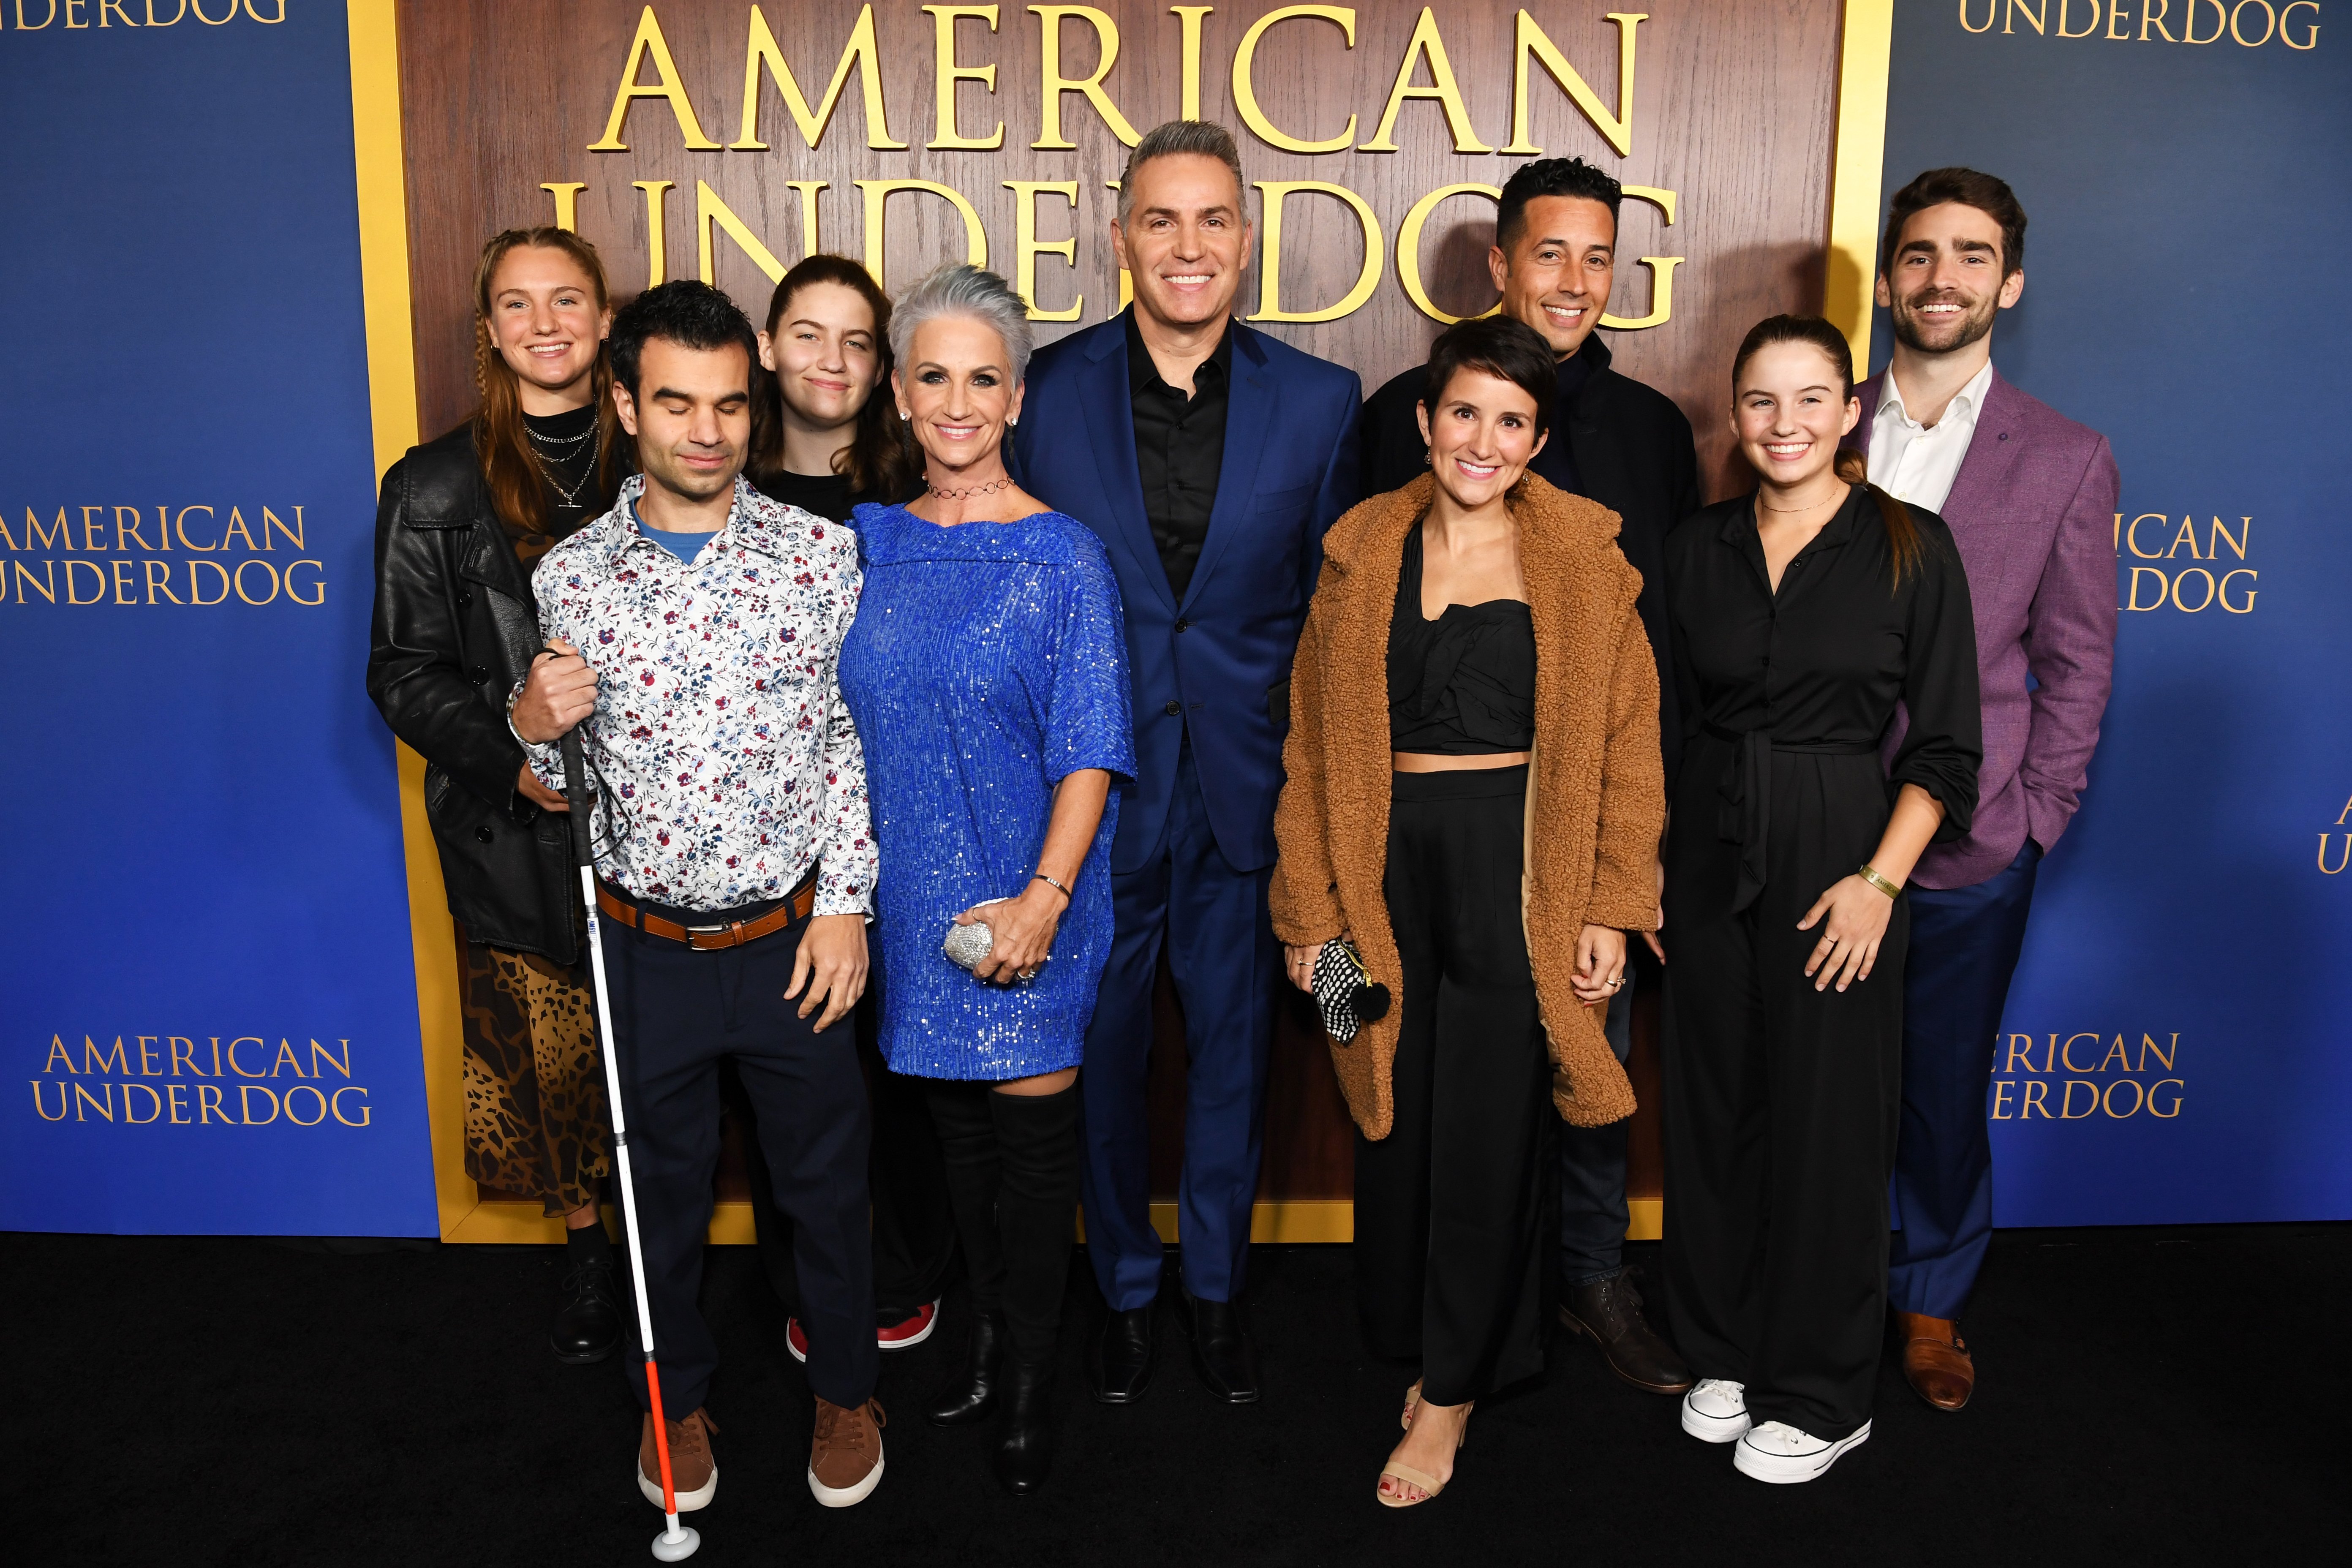 Brenda Warner, Kurt Warner, and son Zachary Warner with guests at the "American Underdog" Premiere in TCL Chinese Theatre, Hollywood, CA, on December 15, 2021. | Source: Getty Images